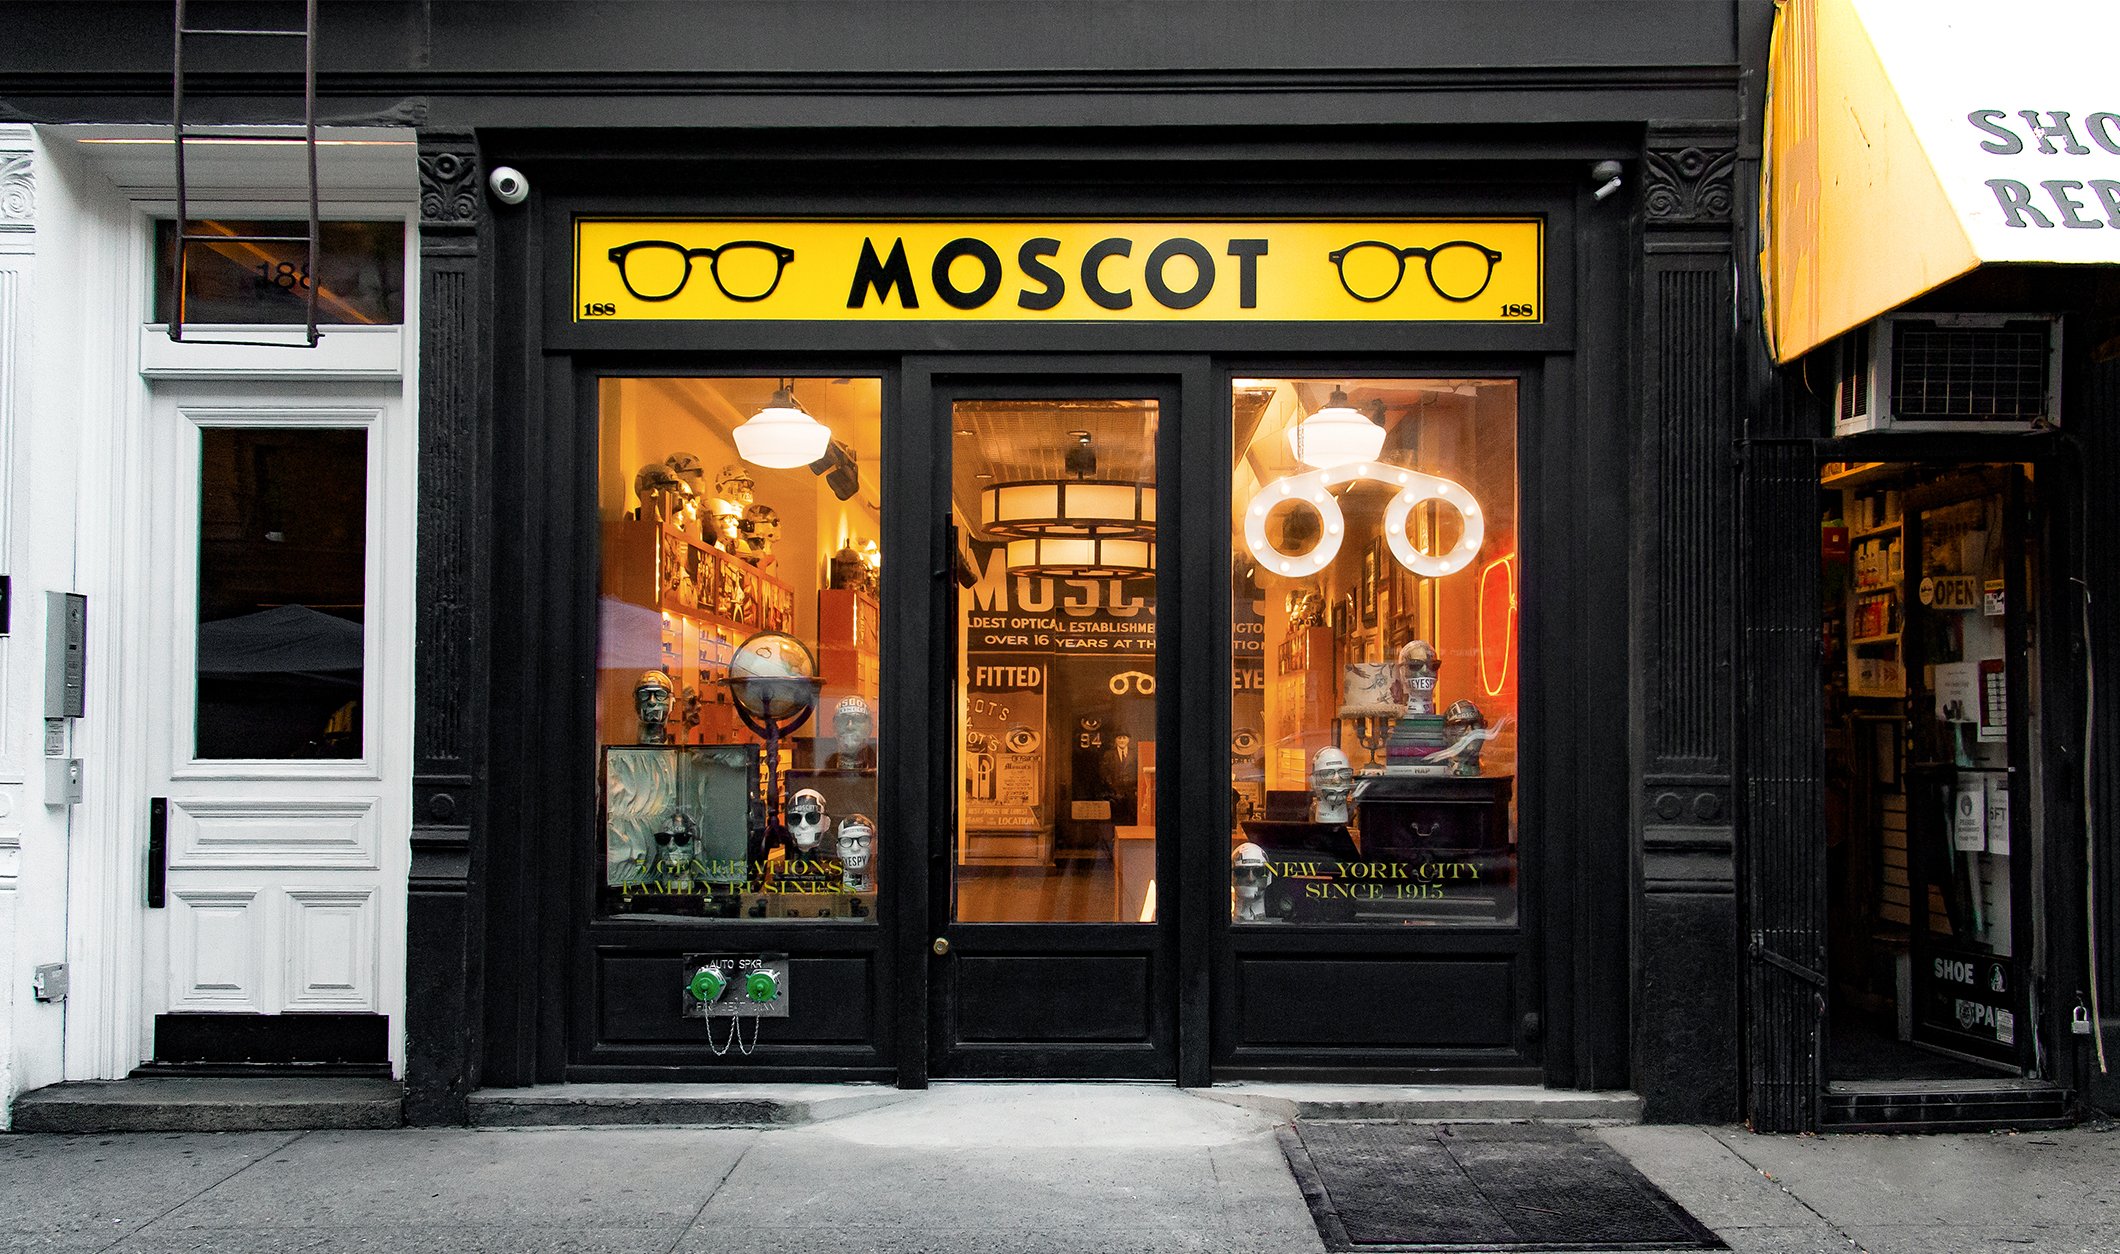 The MOSCOT Upper West Side Shop exterior